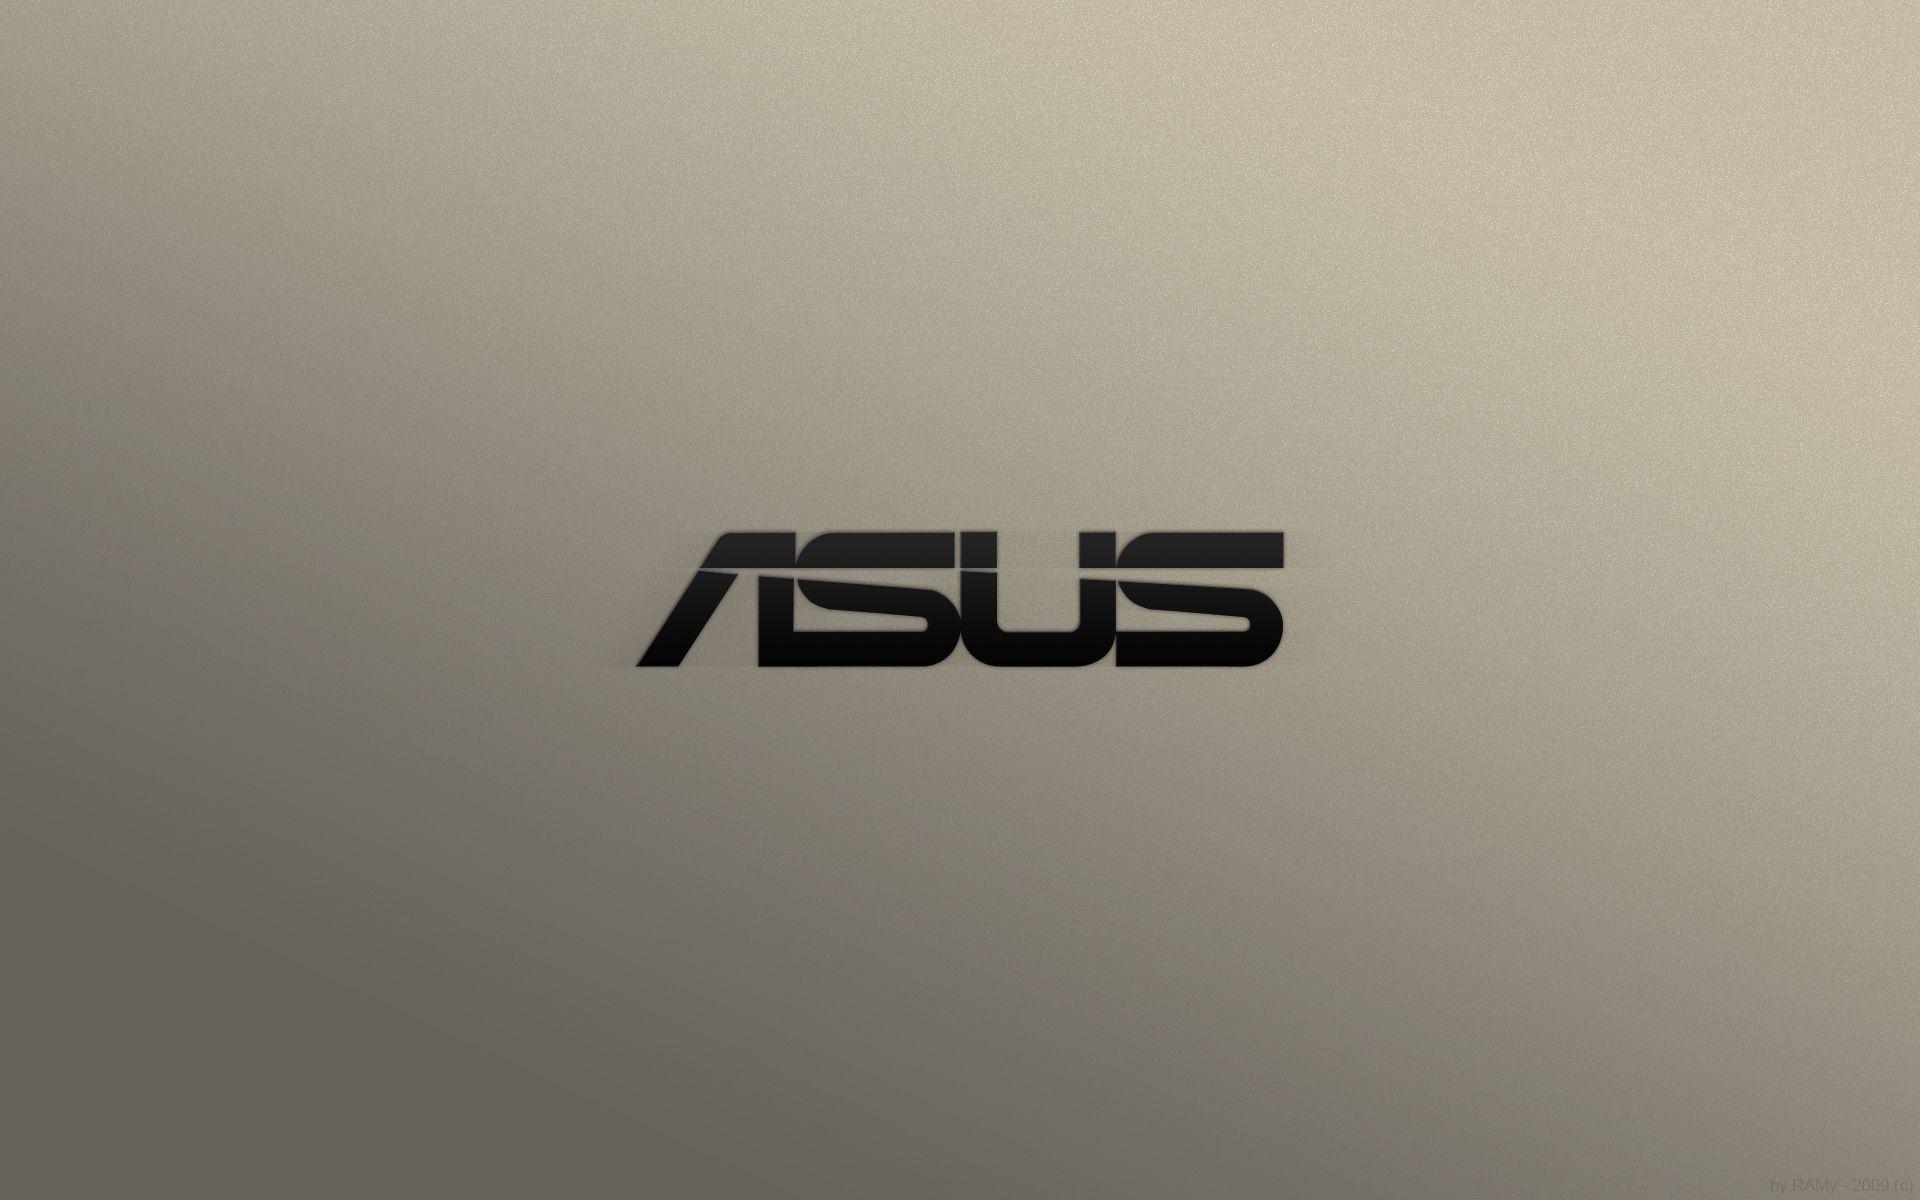 Asus Wallpaper, Best Asus Wallpaper, Wide HD Quality Photo Collection